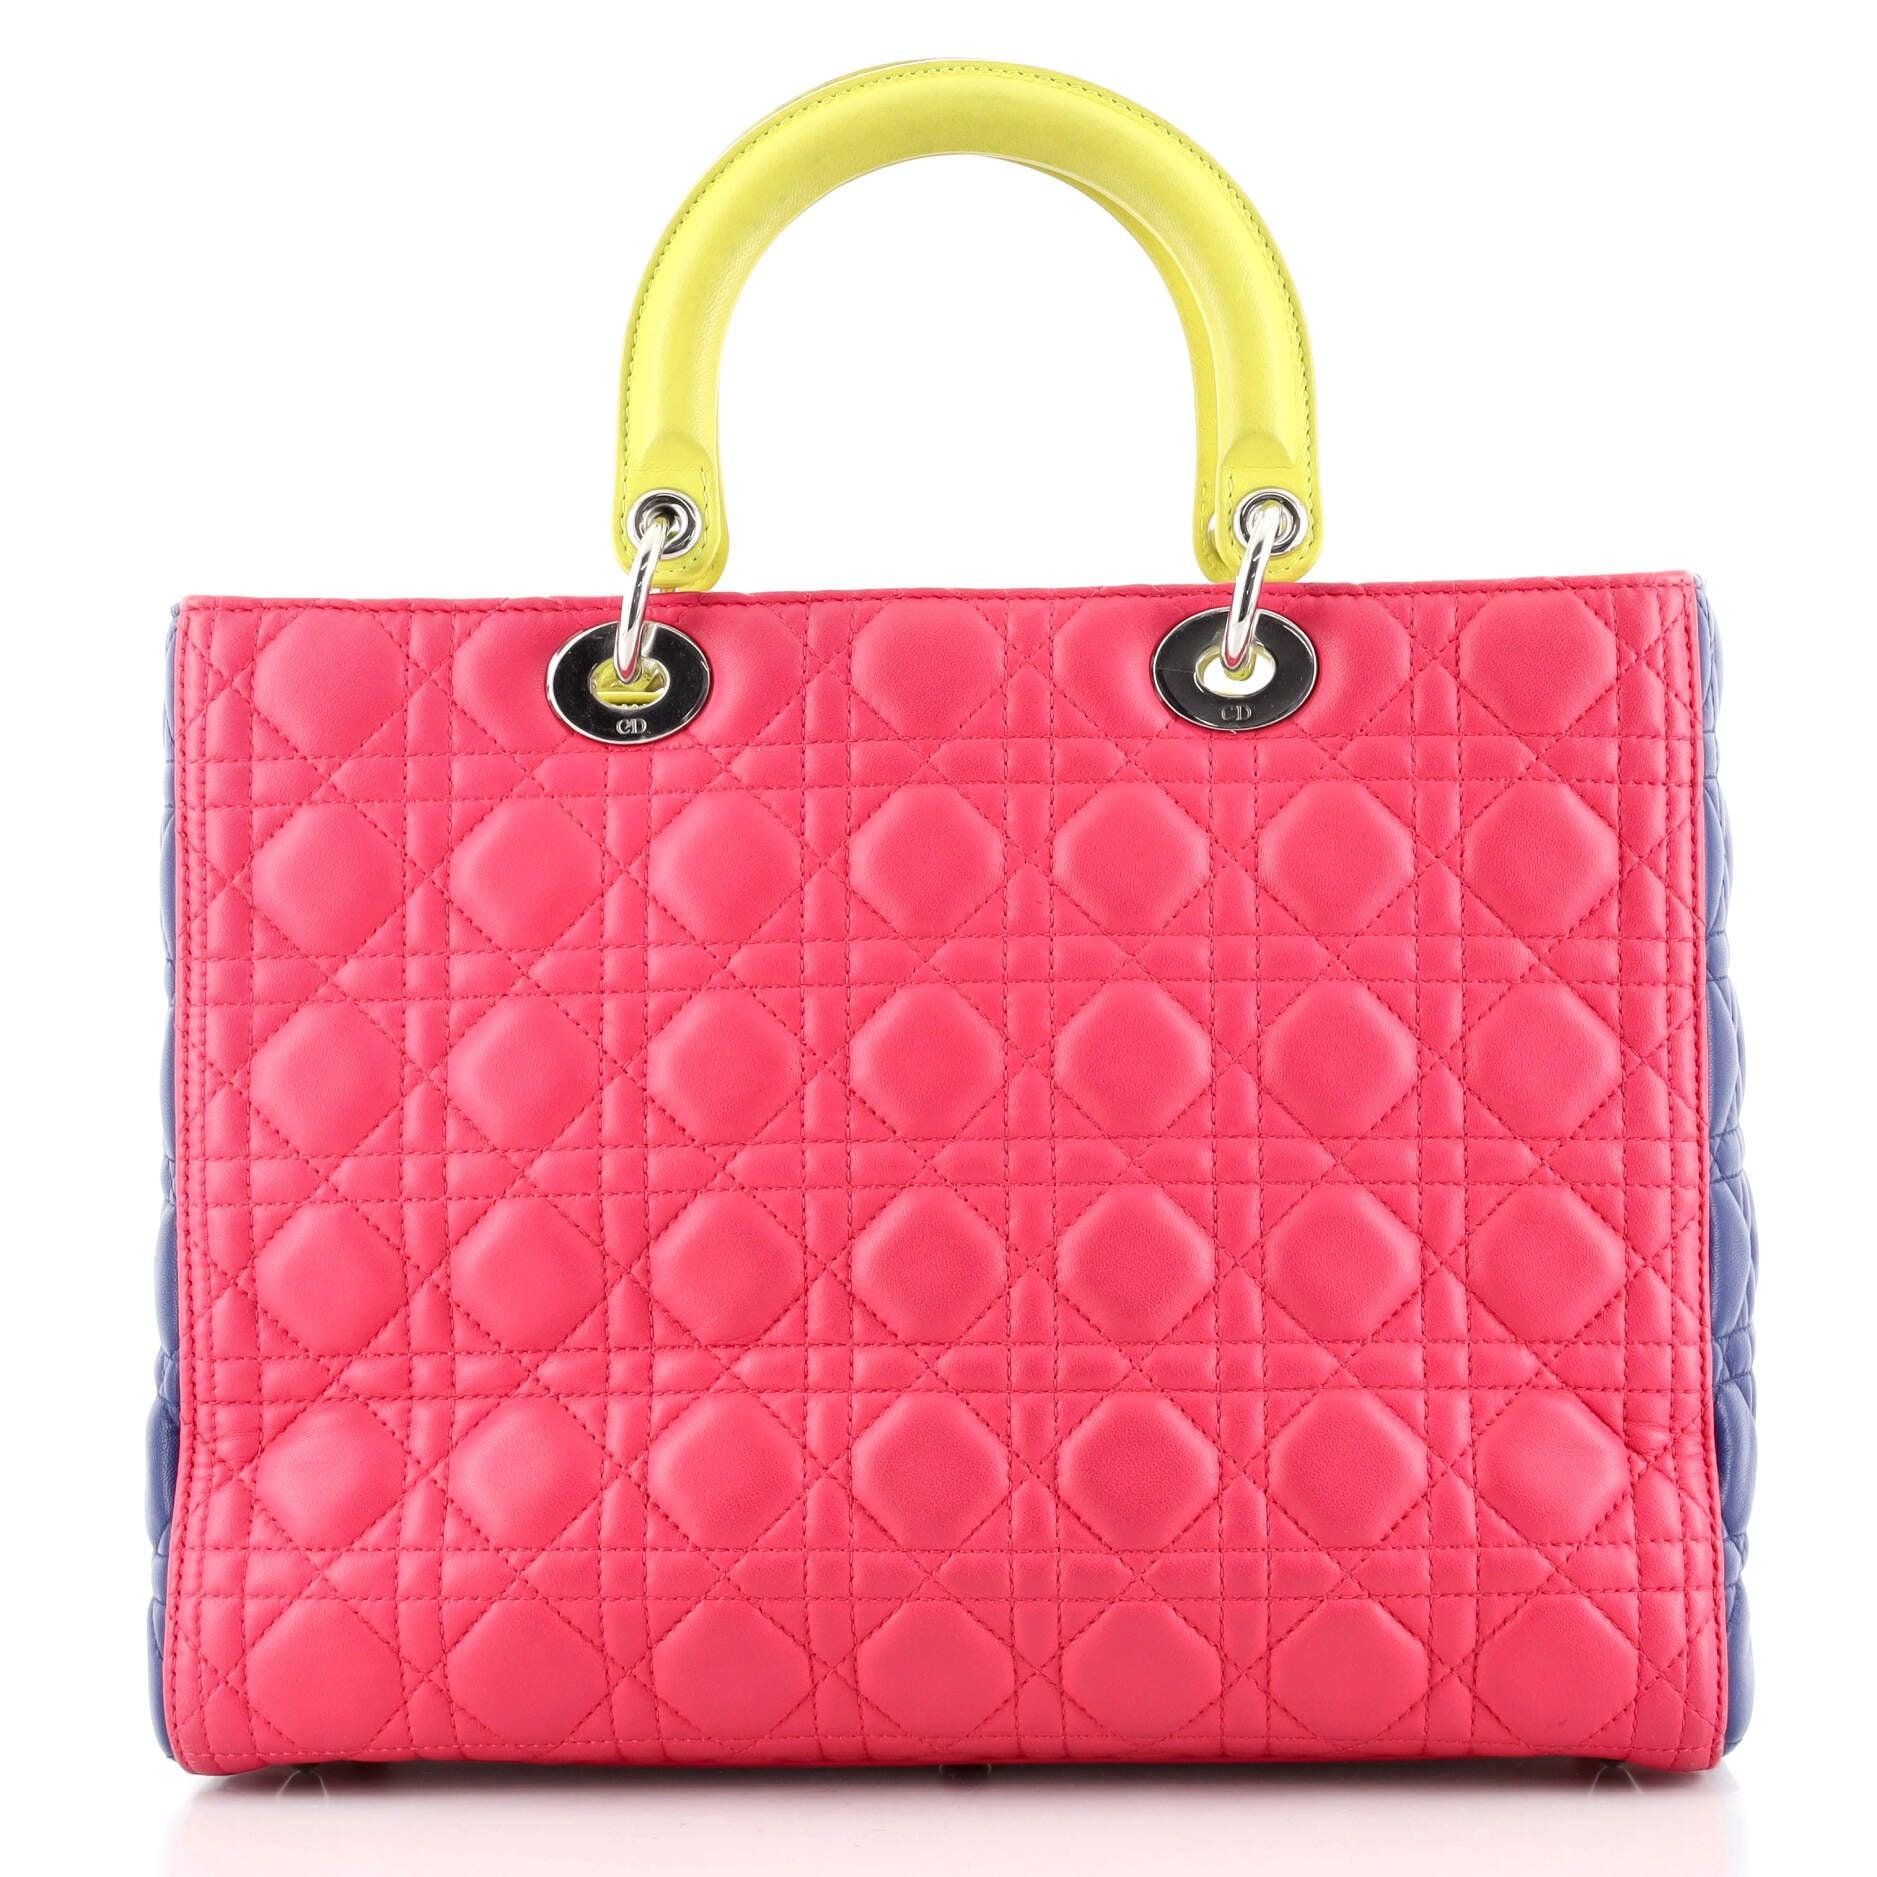 Christian Dior Tricolor Cannage Quilted Lambskin Leather Large Lady Dior Bag

Condition Details: Odor in interior. Slight wear and scuffs on exterior, creasing on rear, moderate wear on base and opening corners. Darkening and wear on handles, strap